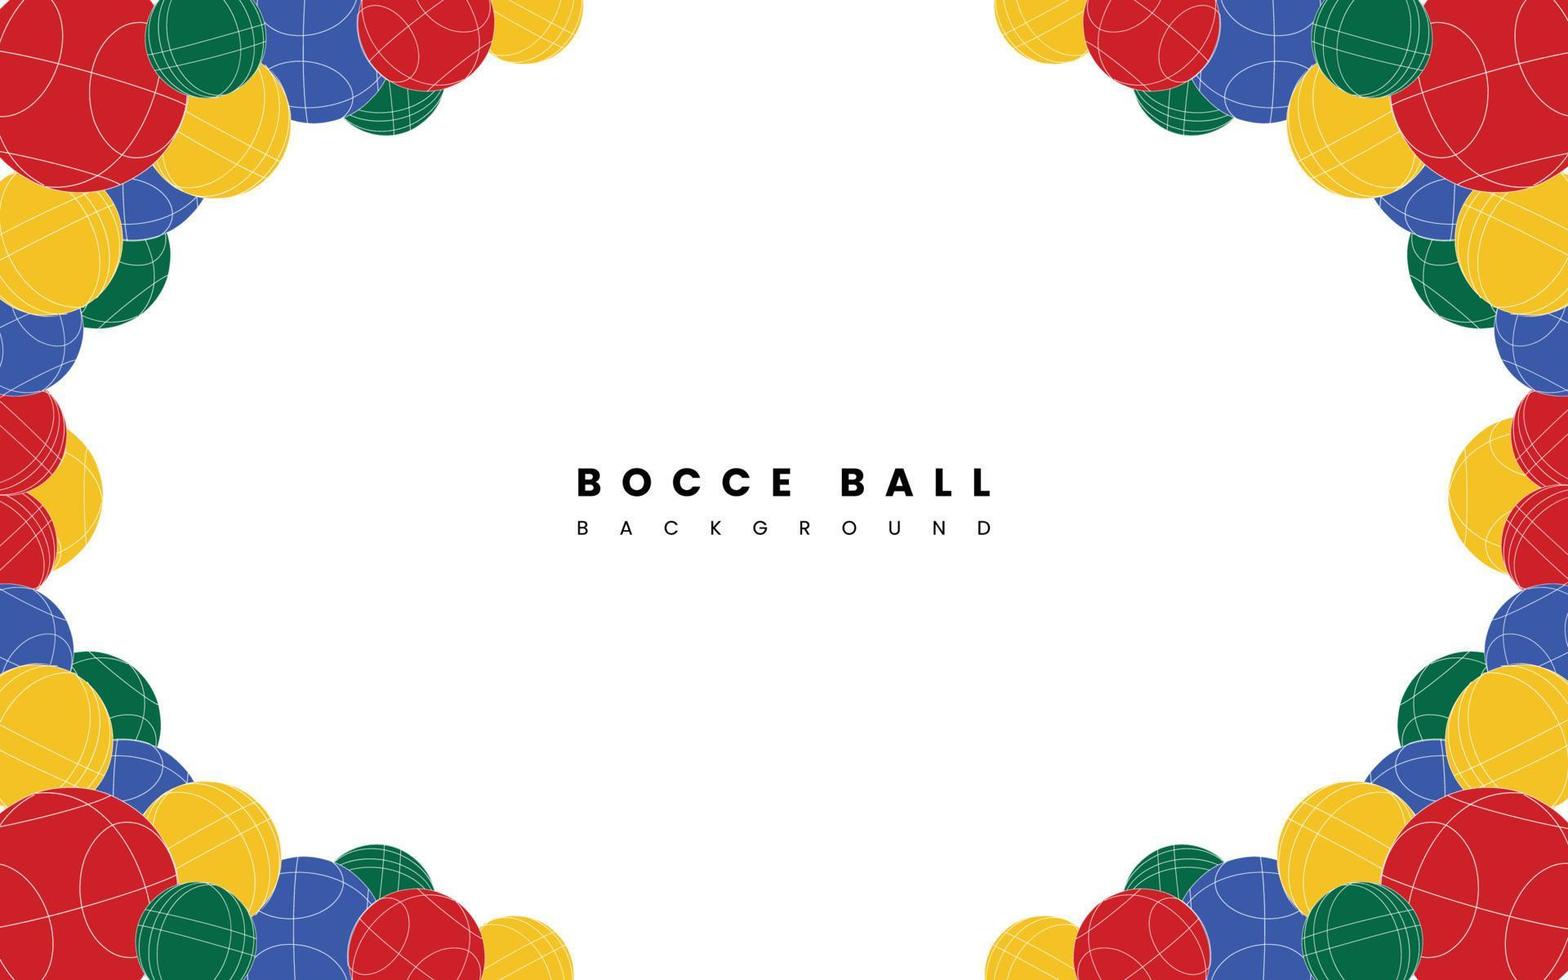 Many Colorful Bocce Ball Backgrounds Can be Used For Design Purposes with a Bocce Ball Sports Theme. vector